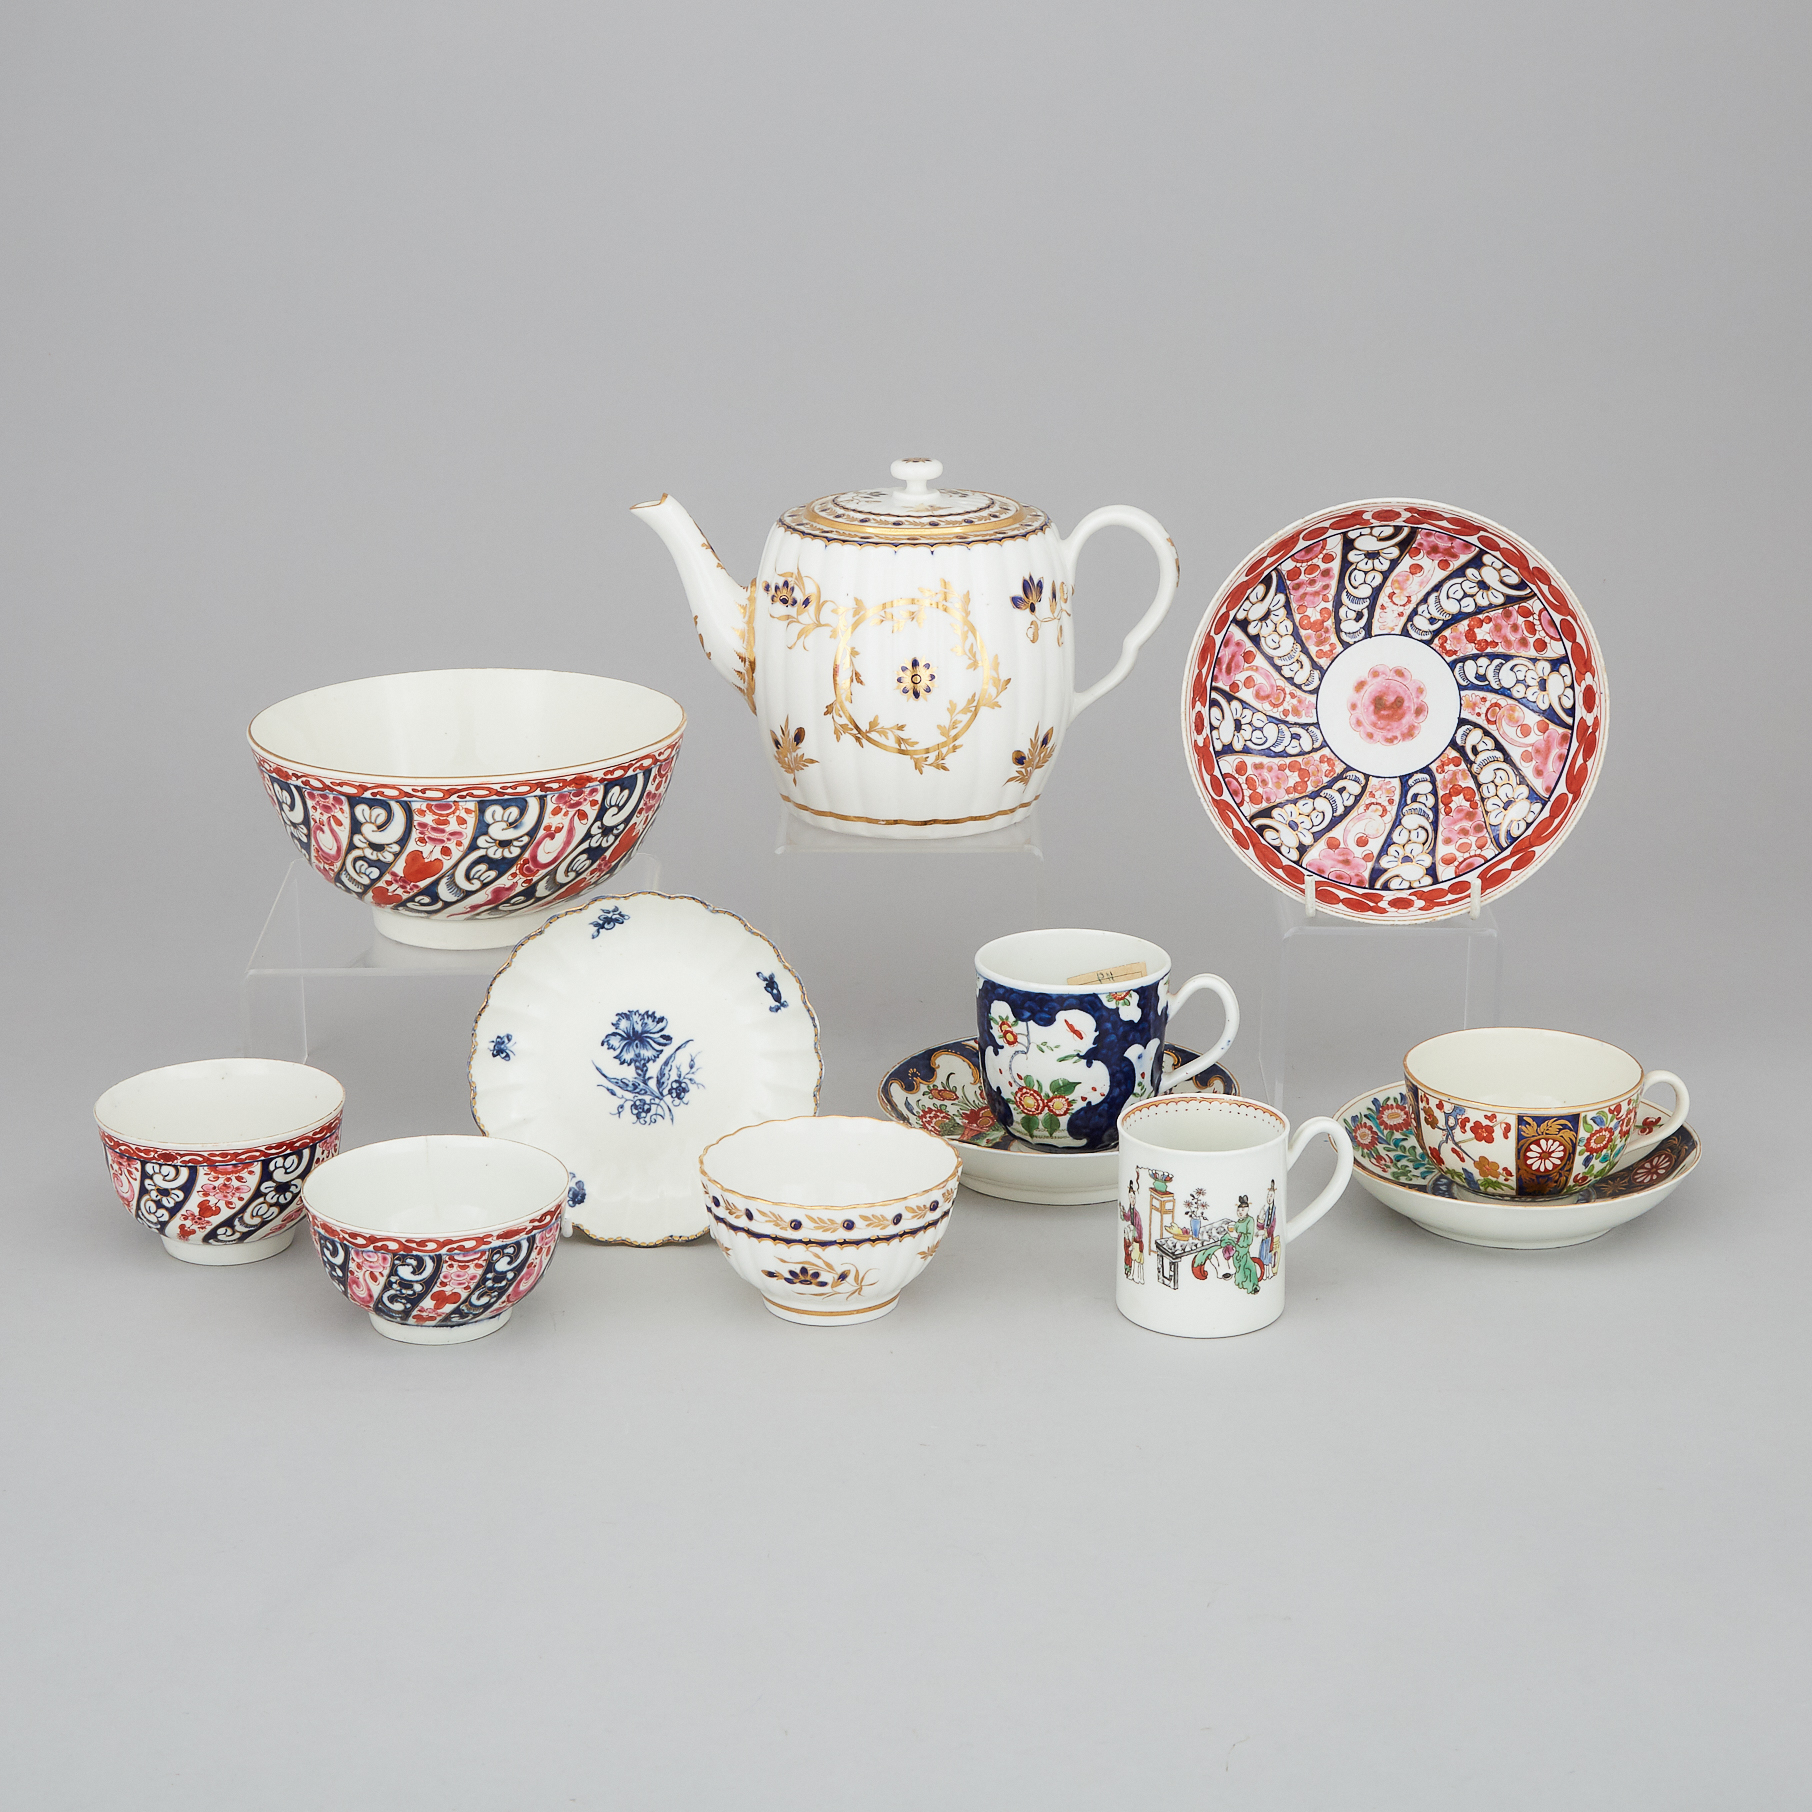 Group of Worcester Porcelain, late 18th/early 19th century